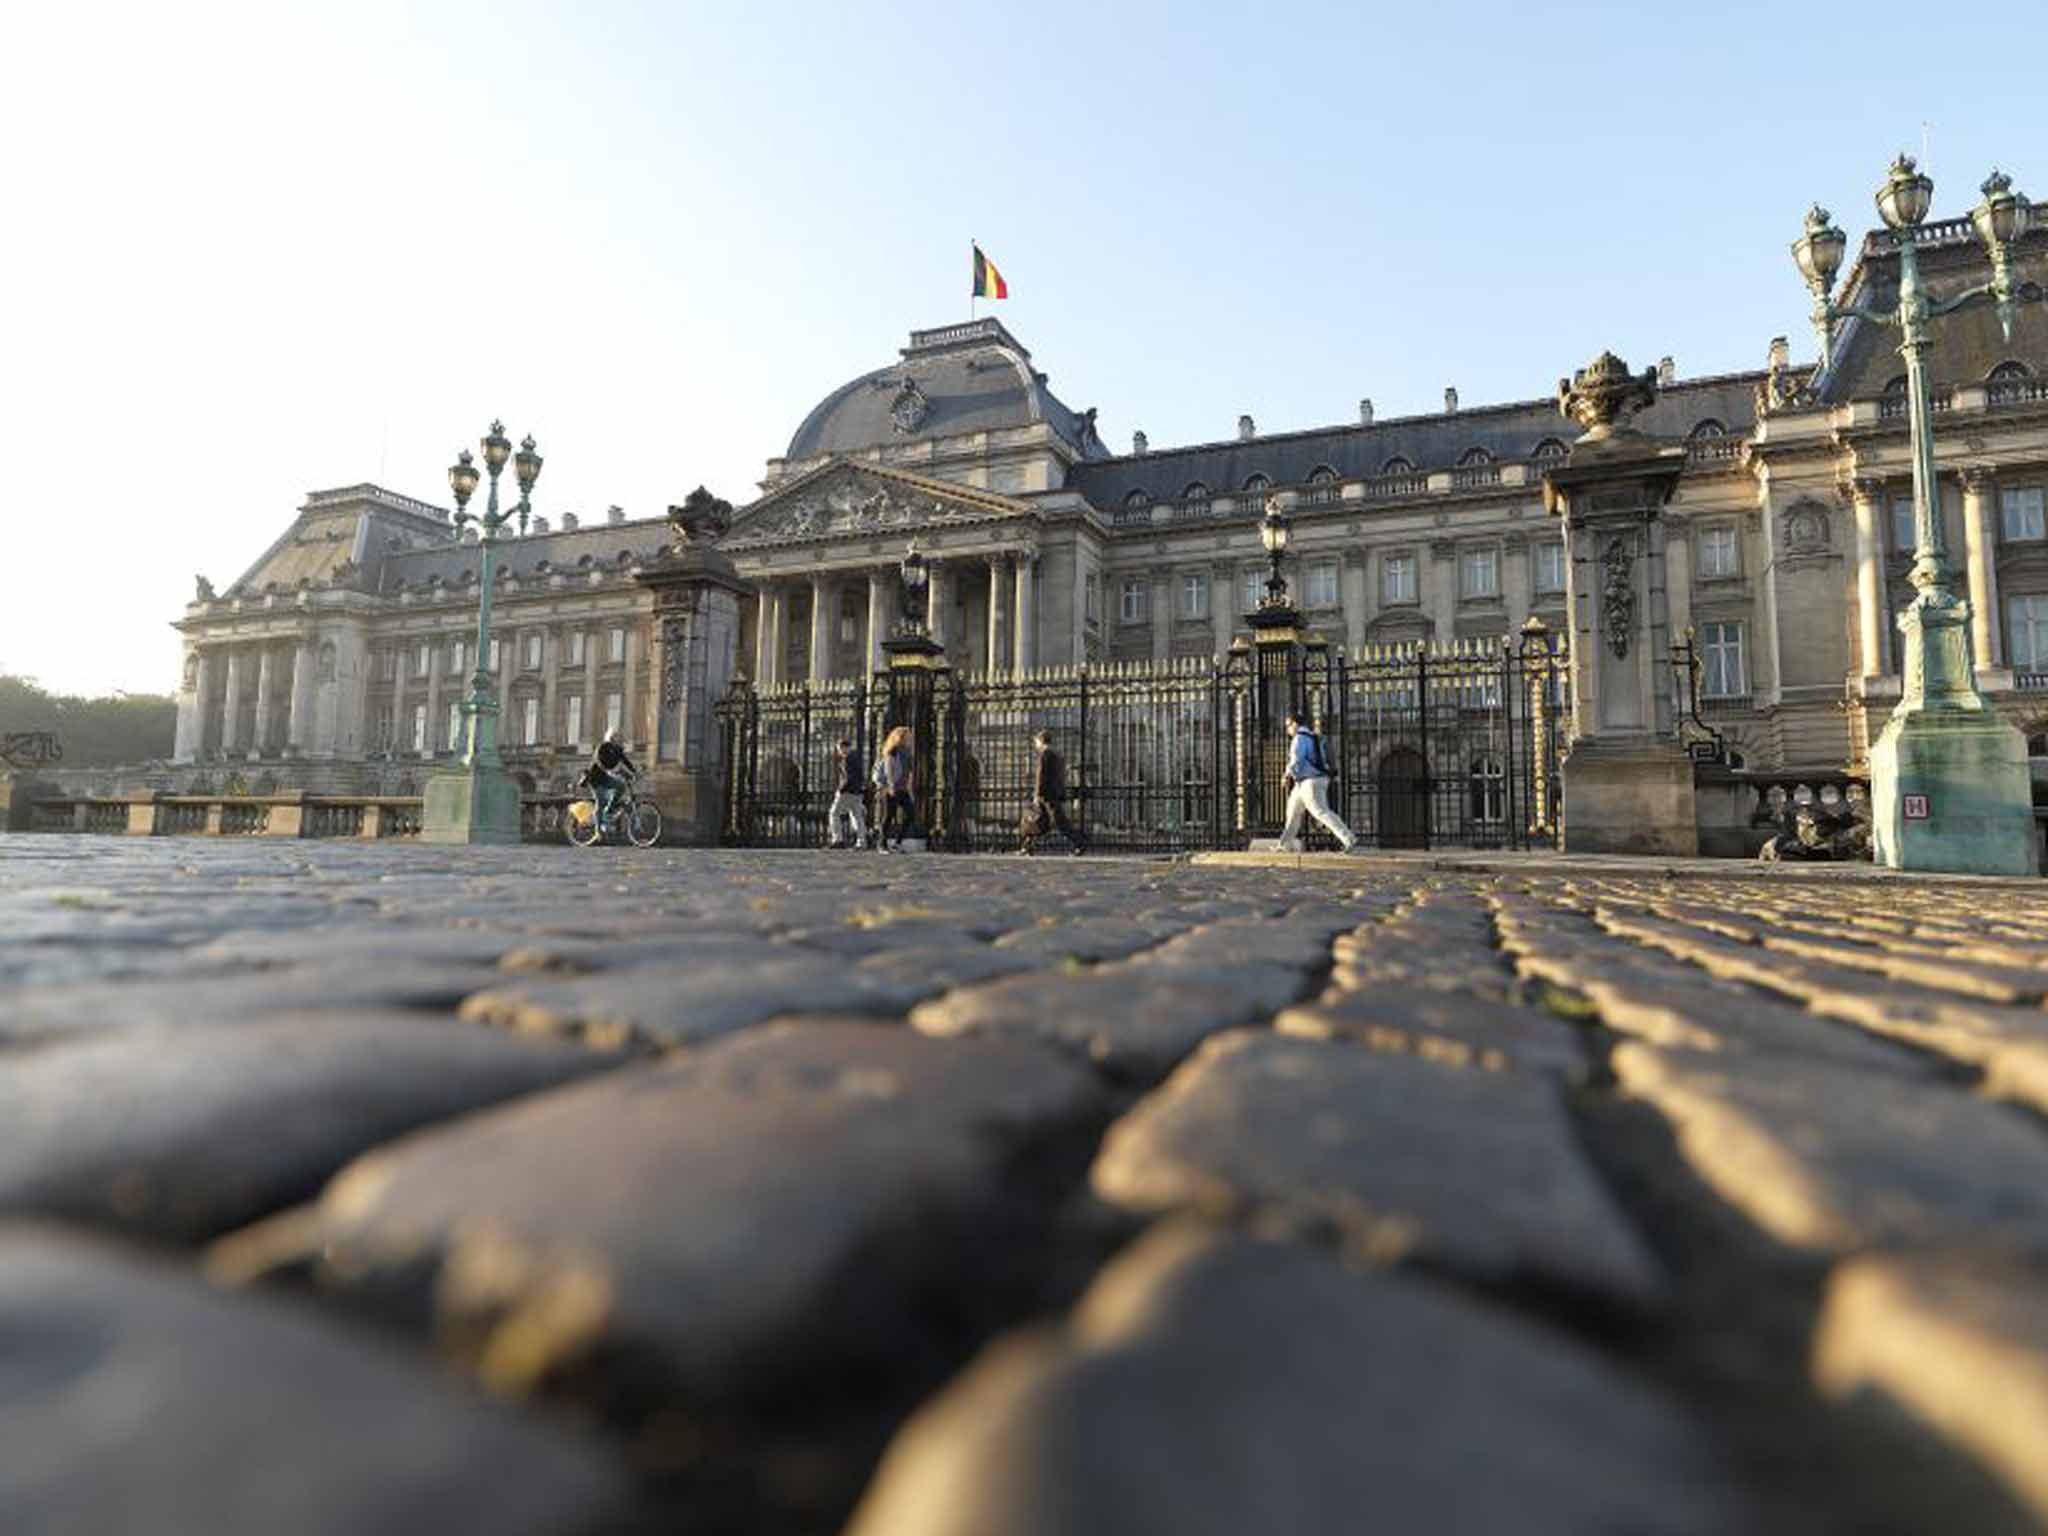 Cobbled together: the Royal Palace